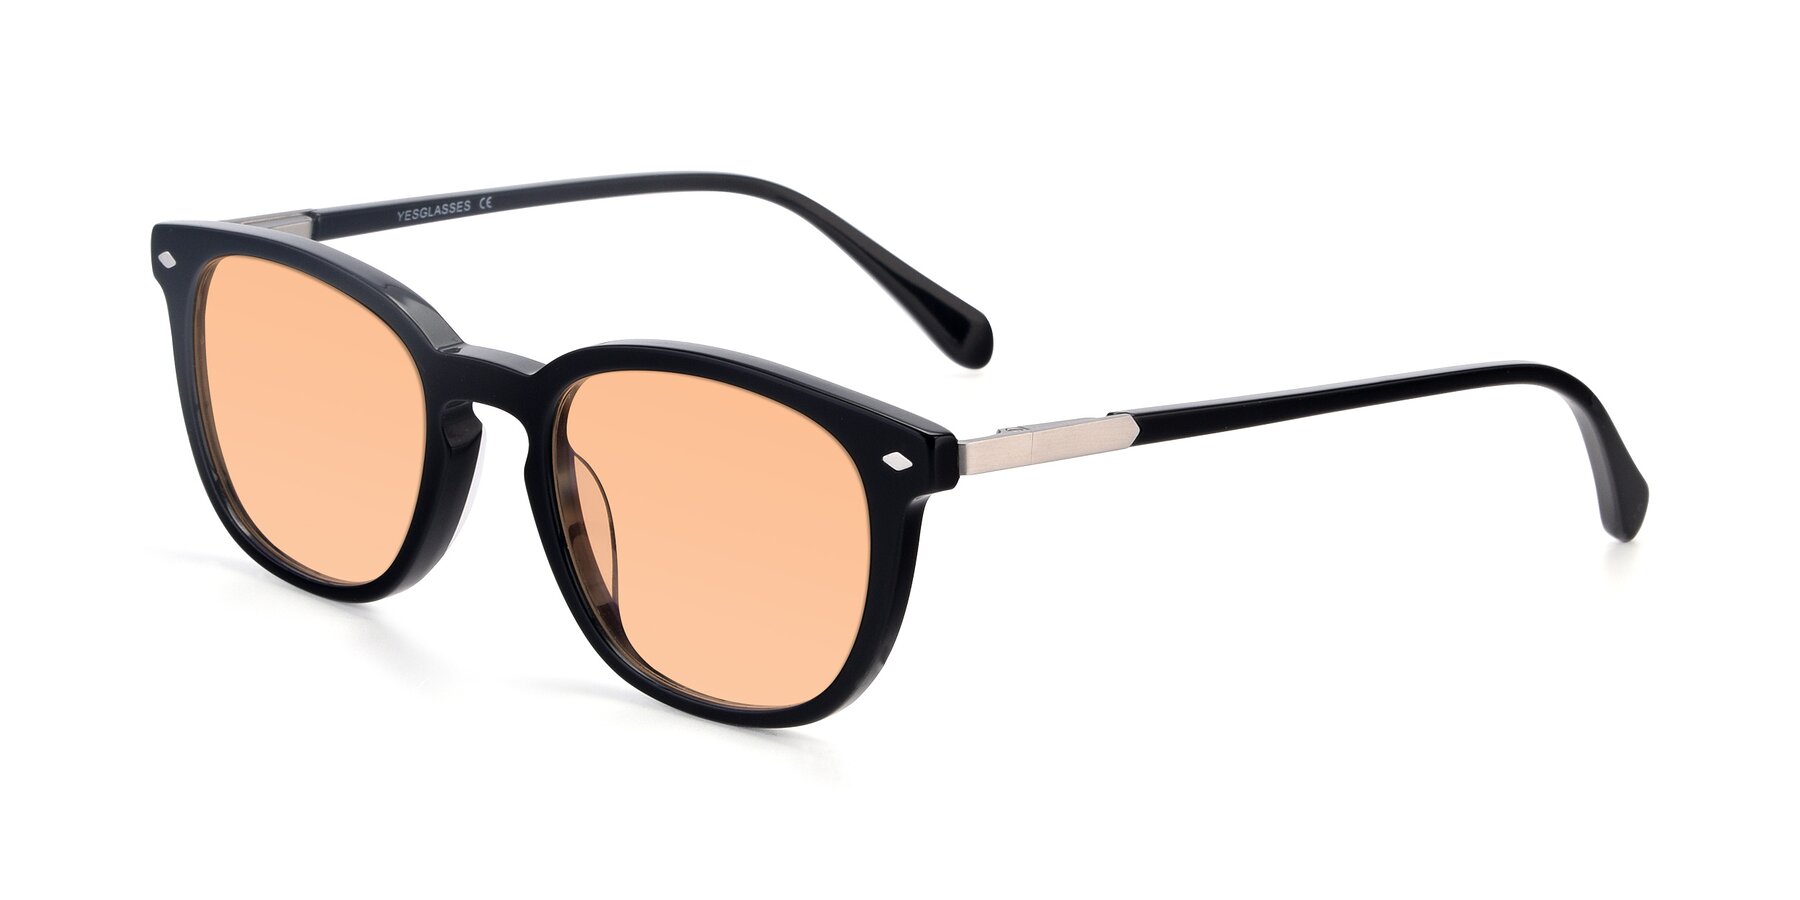 Angle of 17578 in Black with Light Orange Tinted Lenses